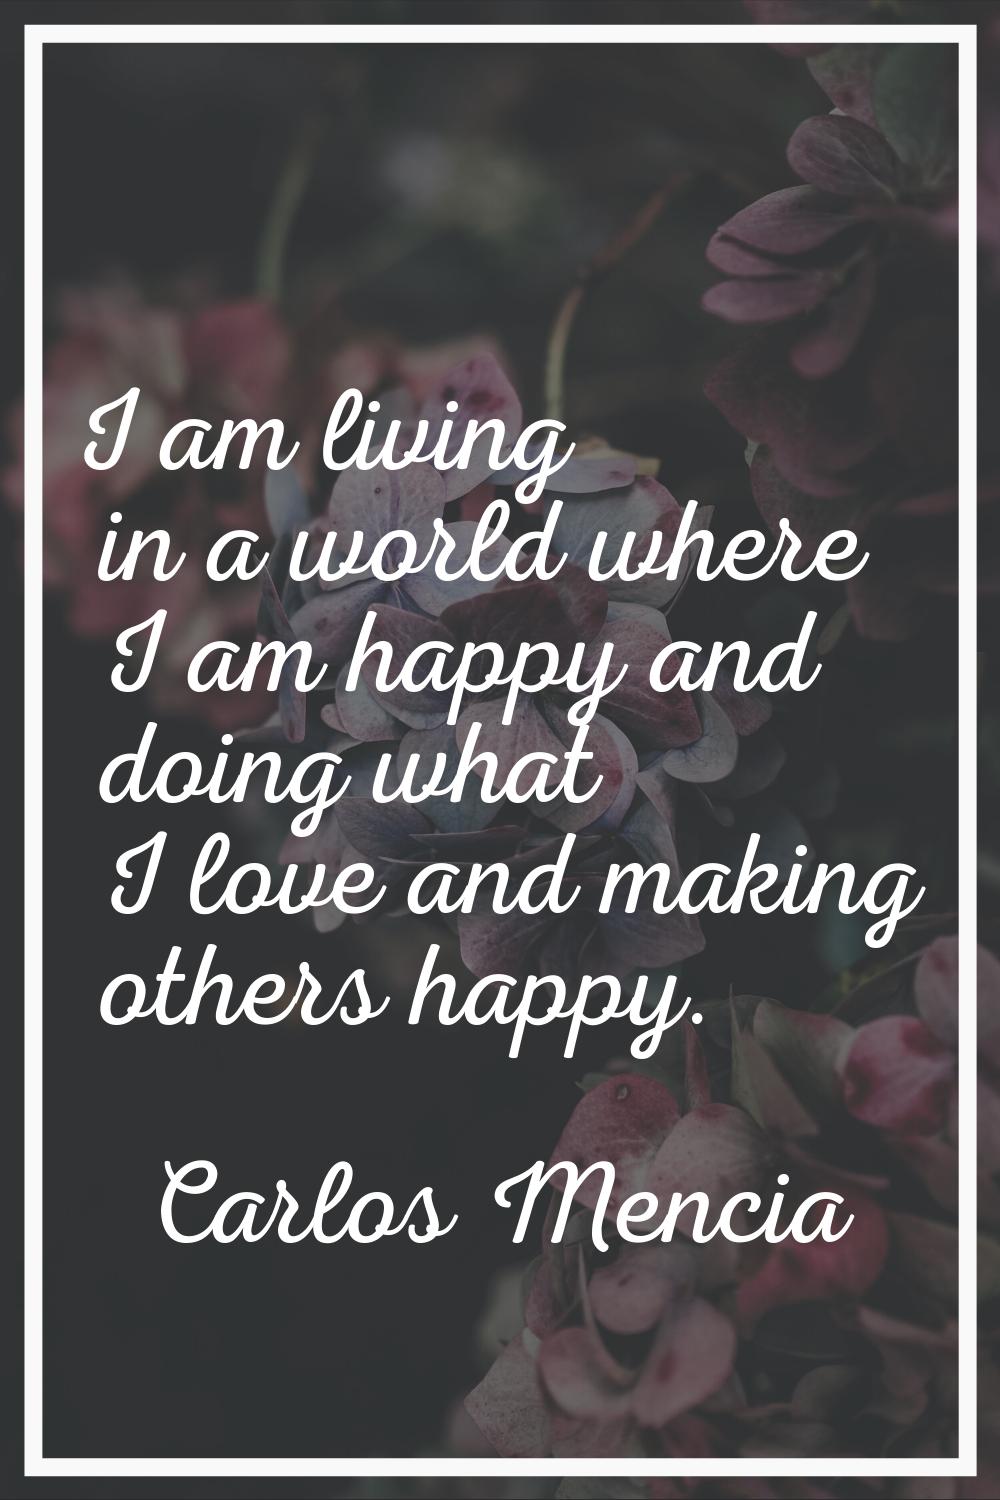 I am living in a world where I am happy and doing what I love and making others happy.